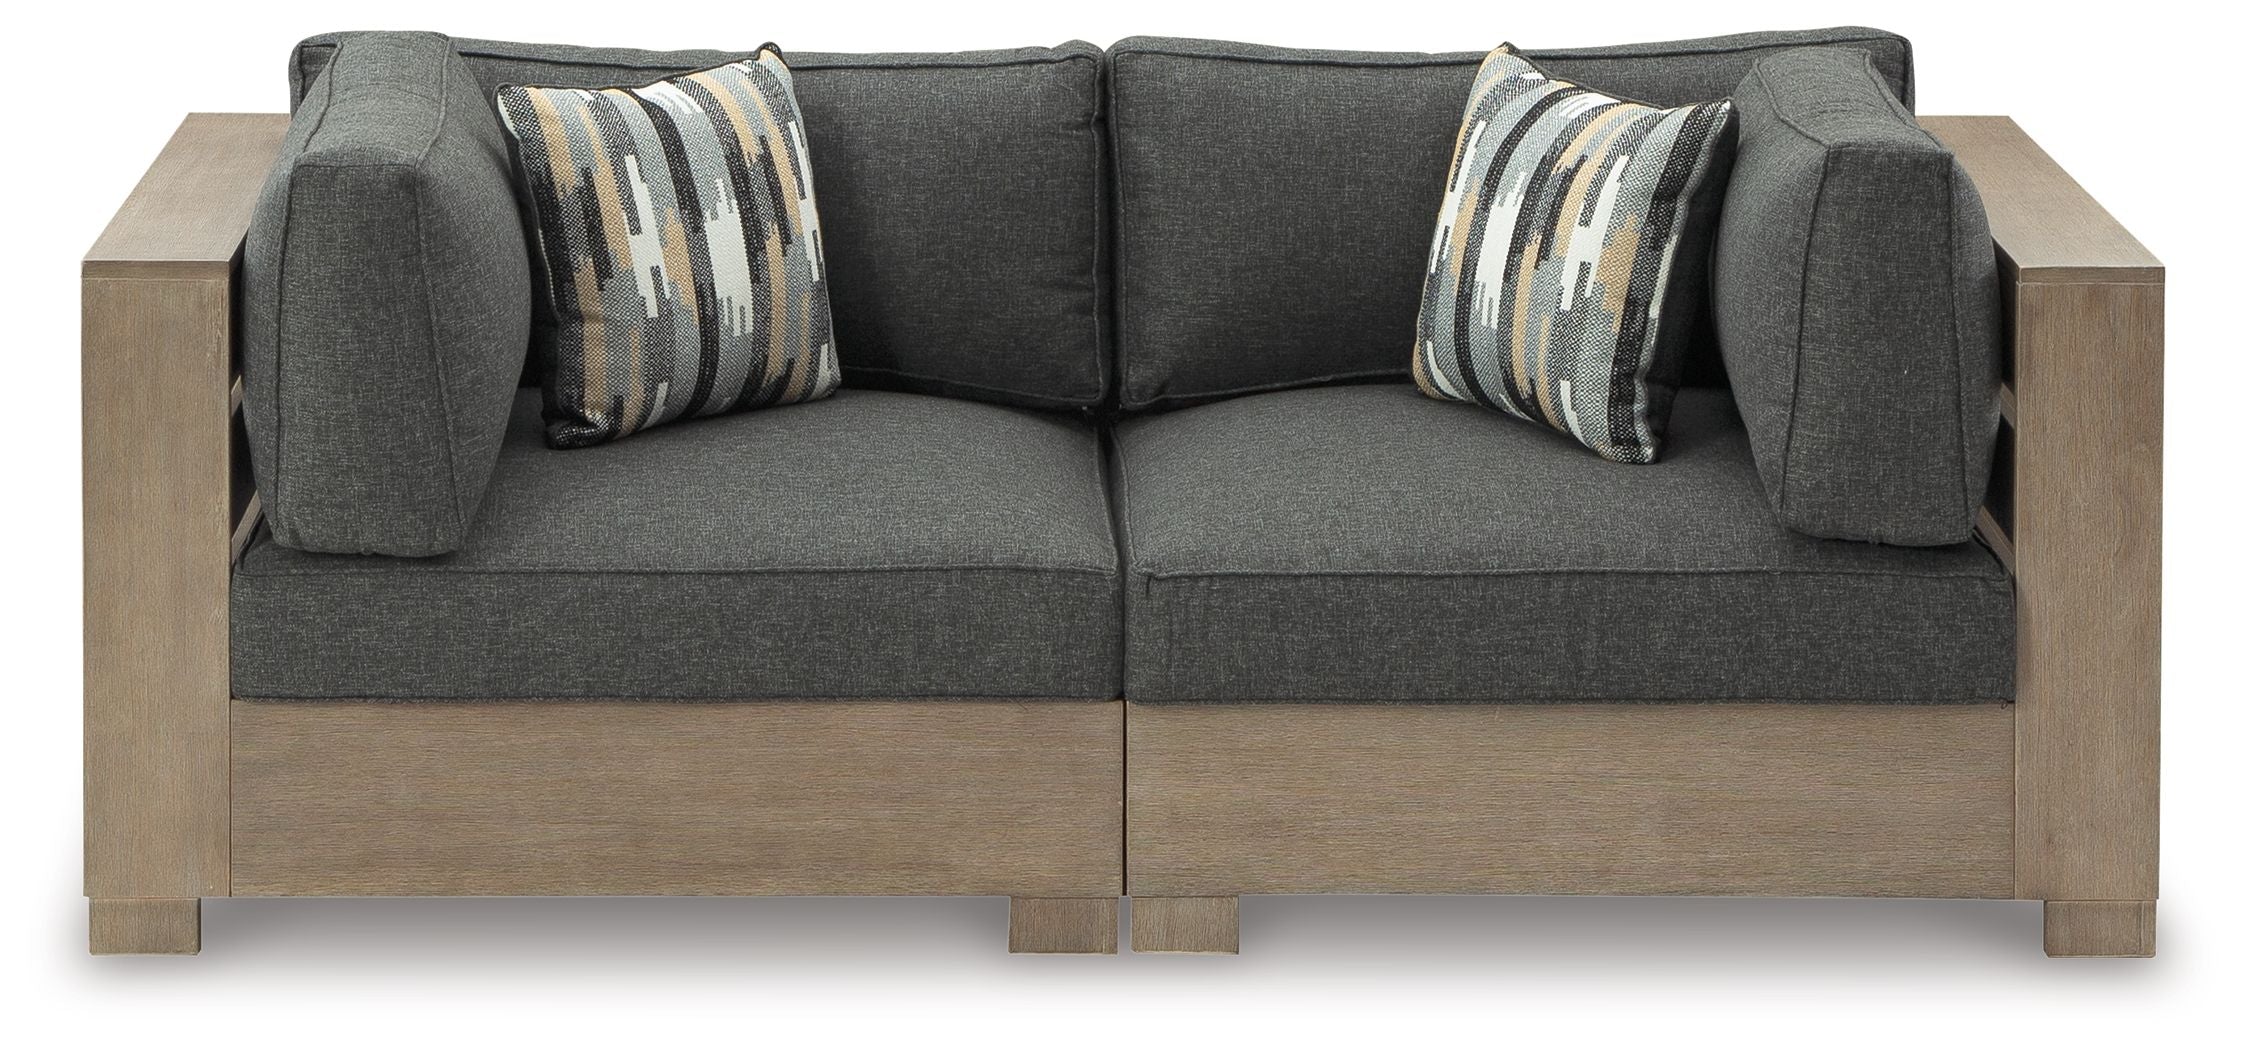 Citrine Park - Sectional-Stationary Sectionals-American Furniture Outlet